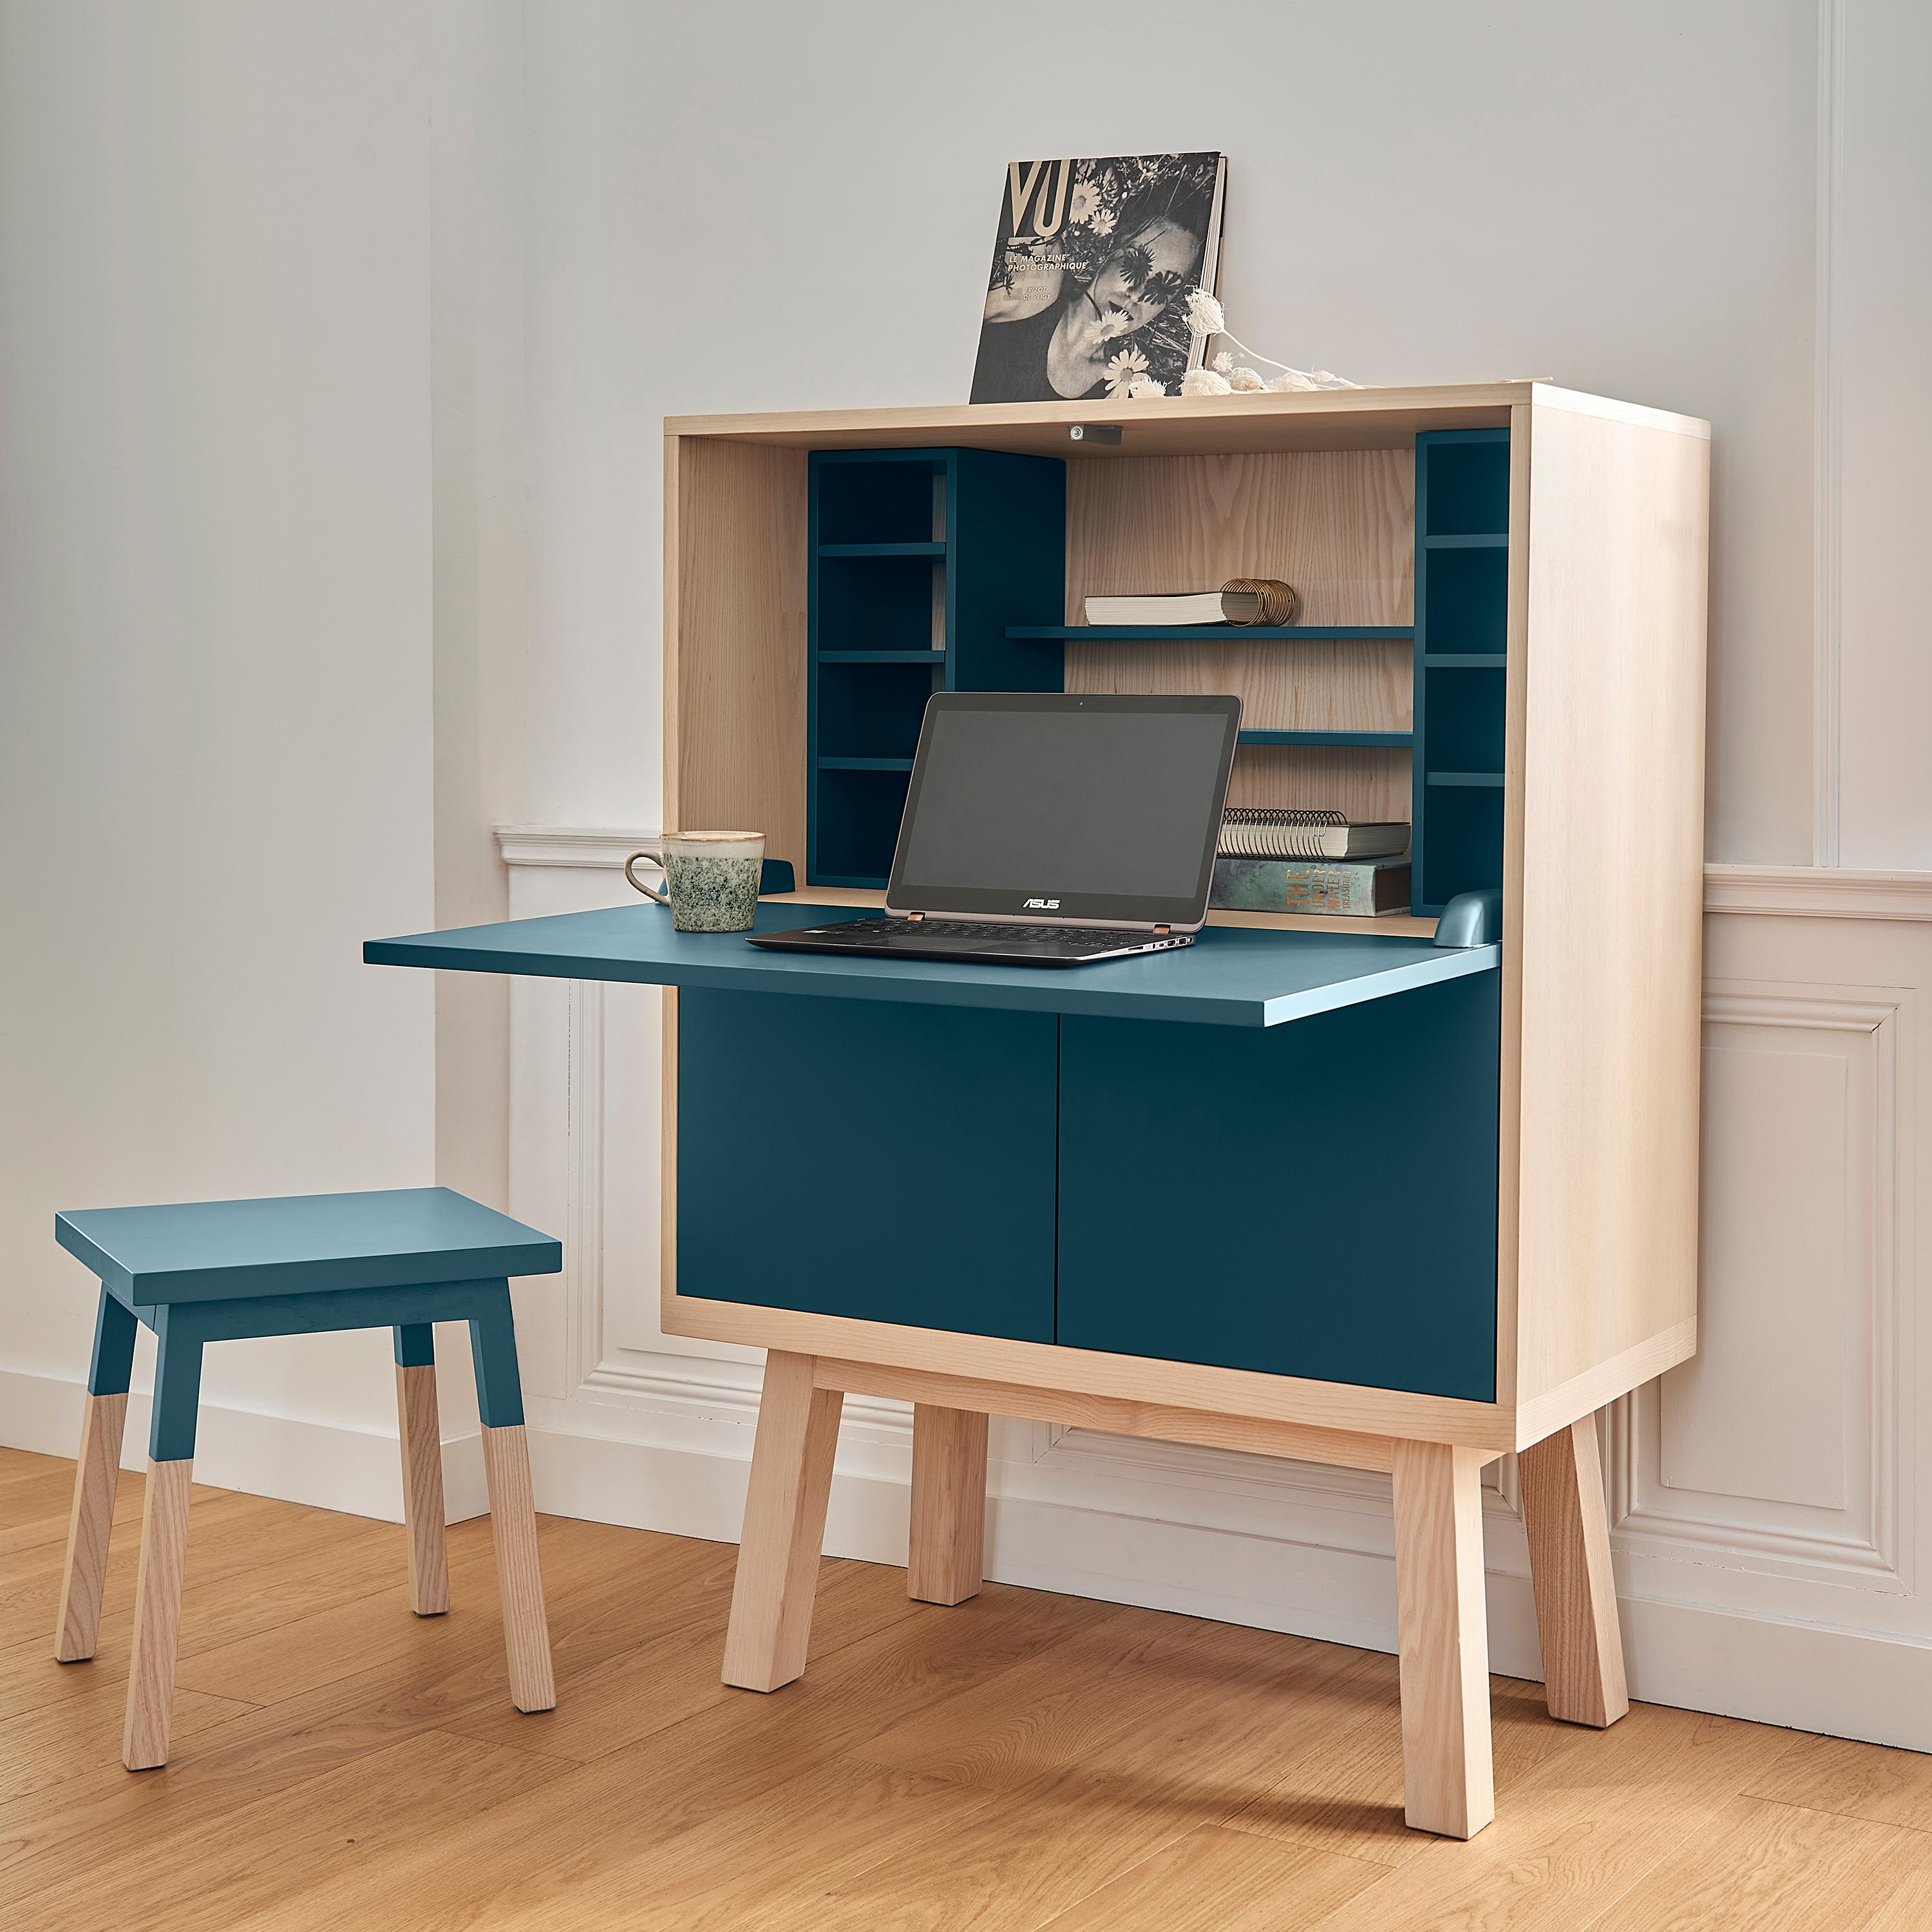 This secretary Desk belongs to our ÉGÉE COLLECTION and has been created in a KUBE concept for optimized storage spaces. 

The ÉGÉE collection is designed by the Parisian designer Eric Gizard. Eric adopts for this collection the refined codes of